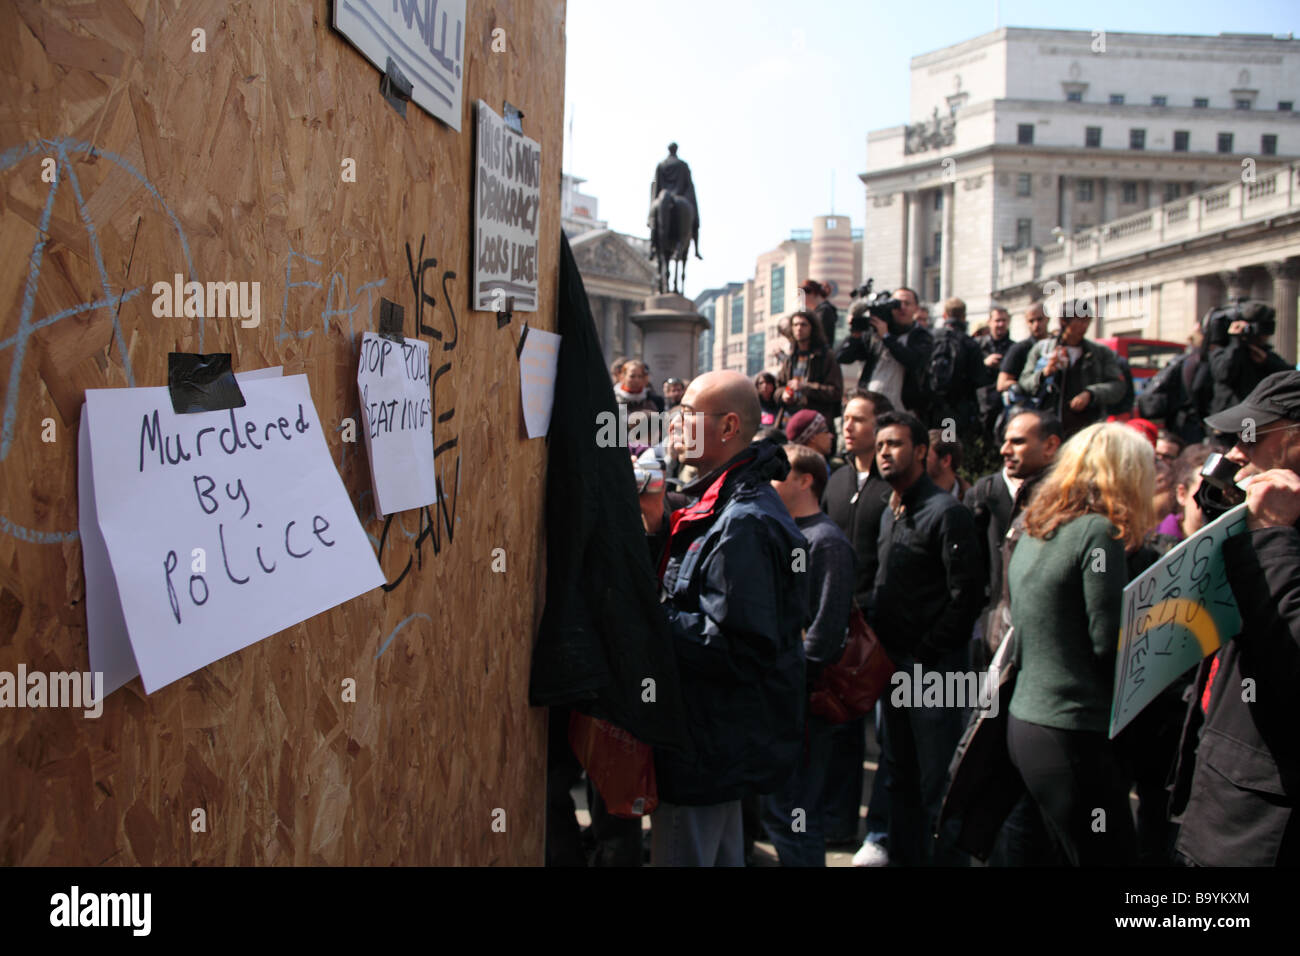 Protest messages posted on a board outside the Bank of England during the 2009 G20 summit, London, UK. Stock Photo